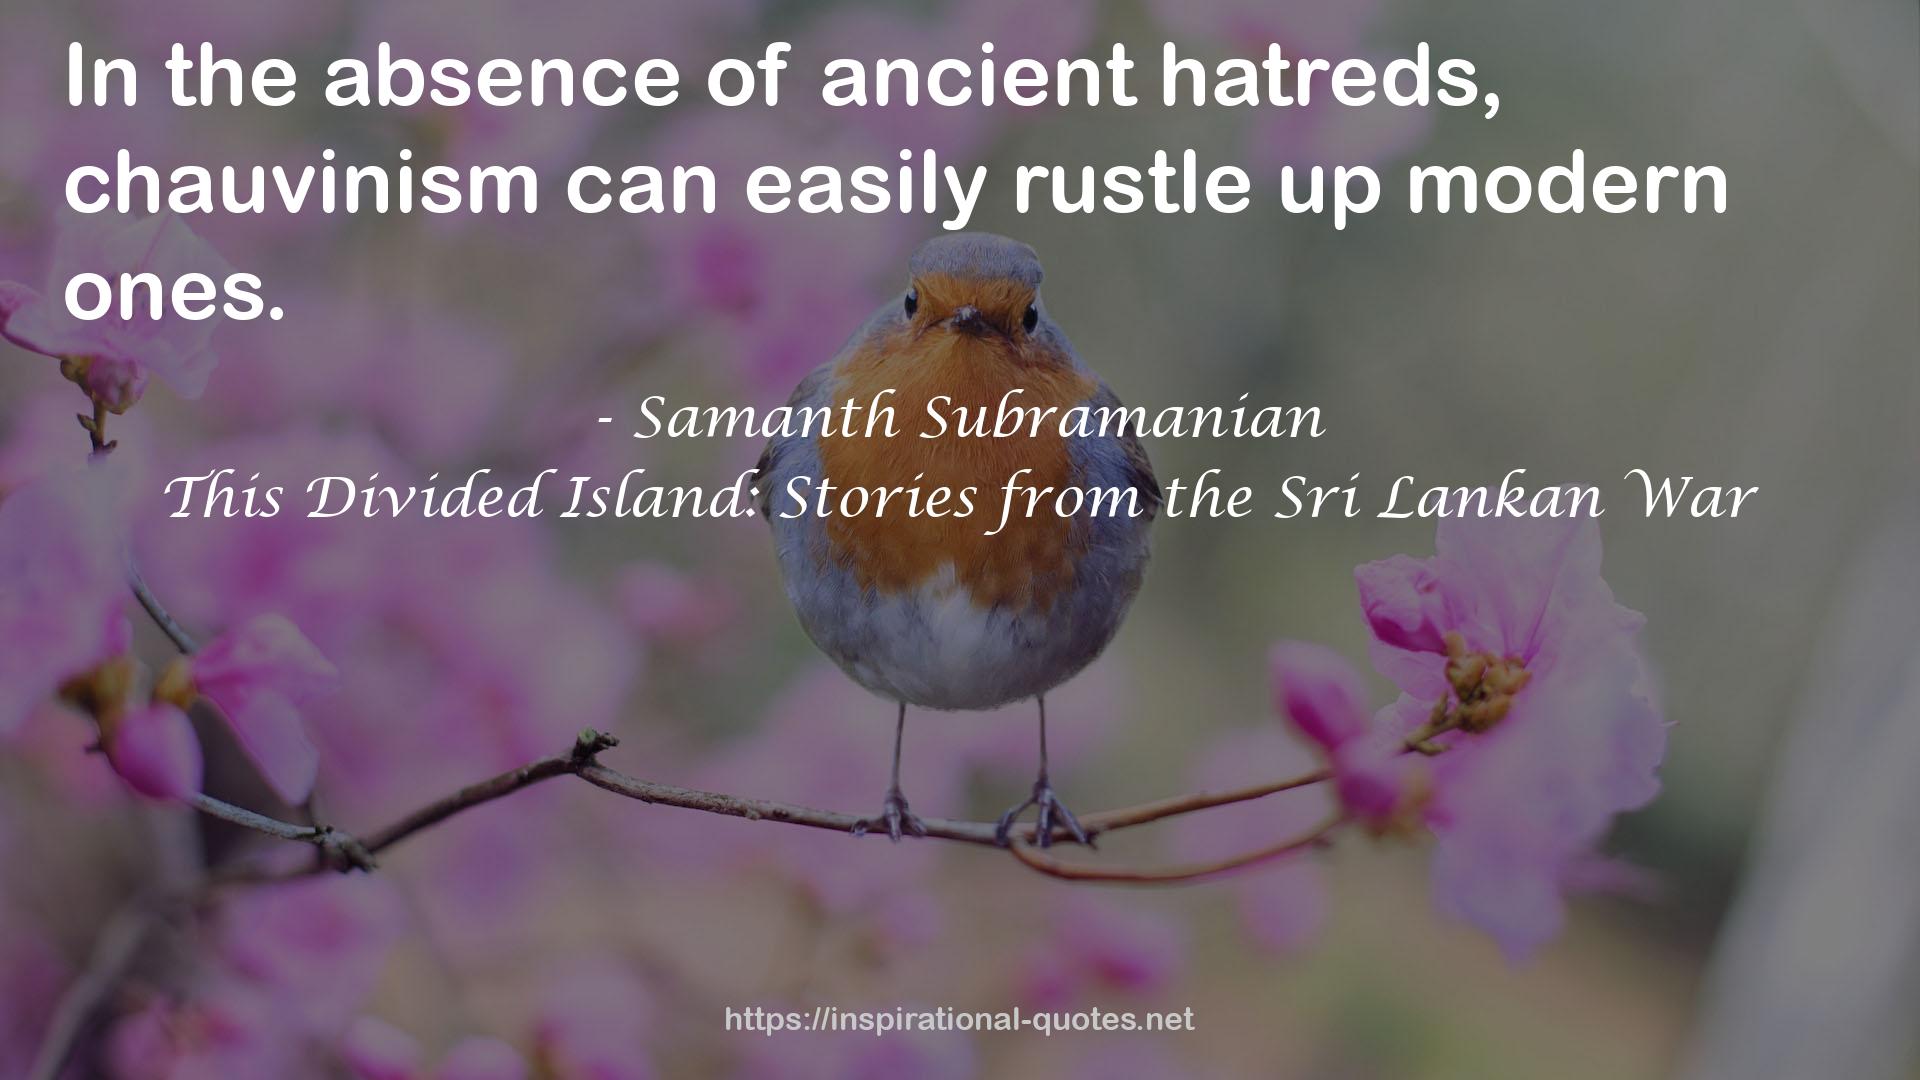 This Divided Island: Stories from the Sri Lankan War QUOTES